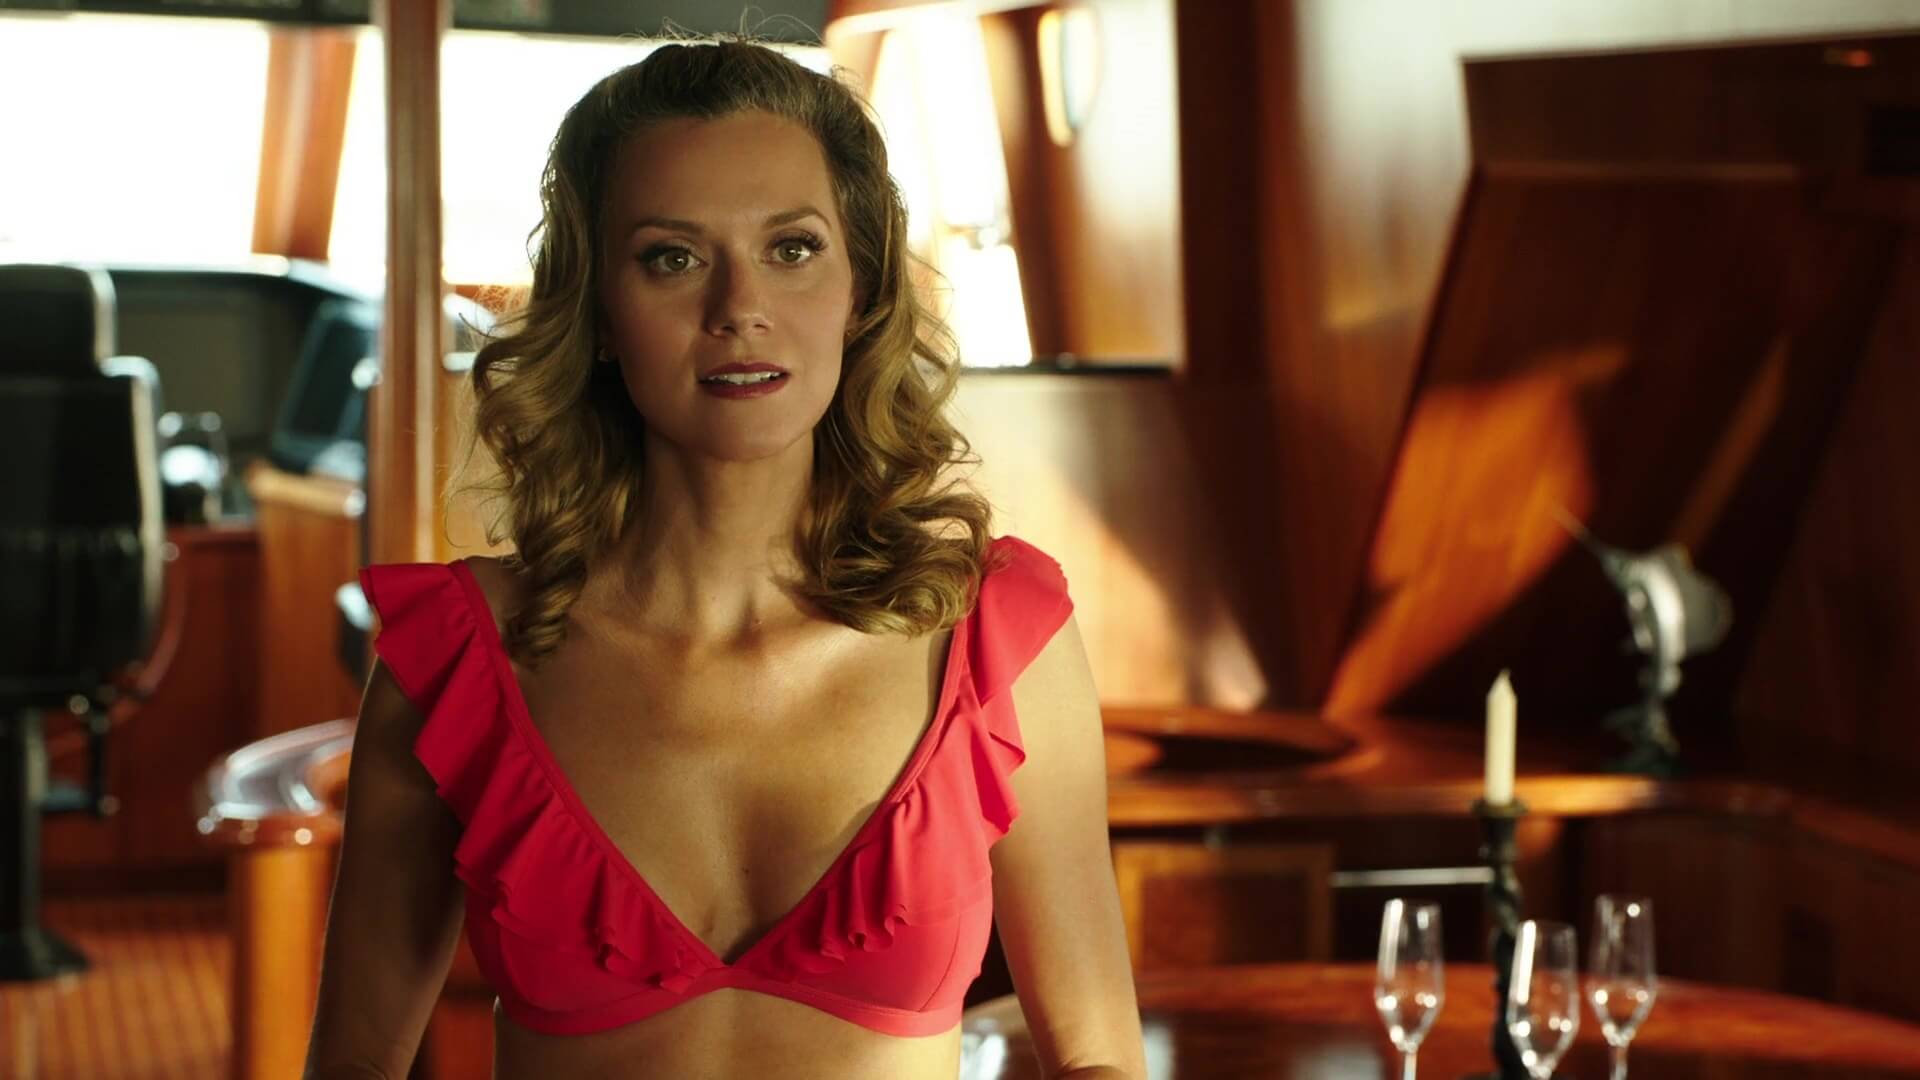 The Hottest Hilarie Burton Photos Will Prove That She Is One Of The Hottest Women...